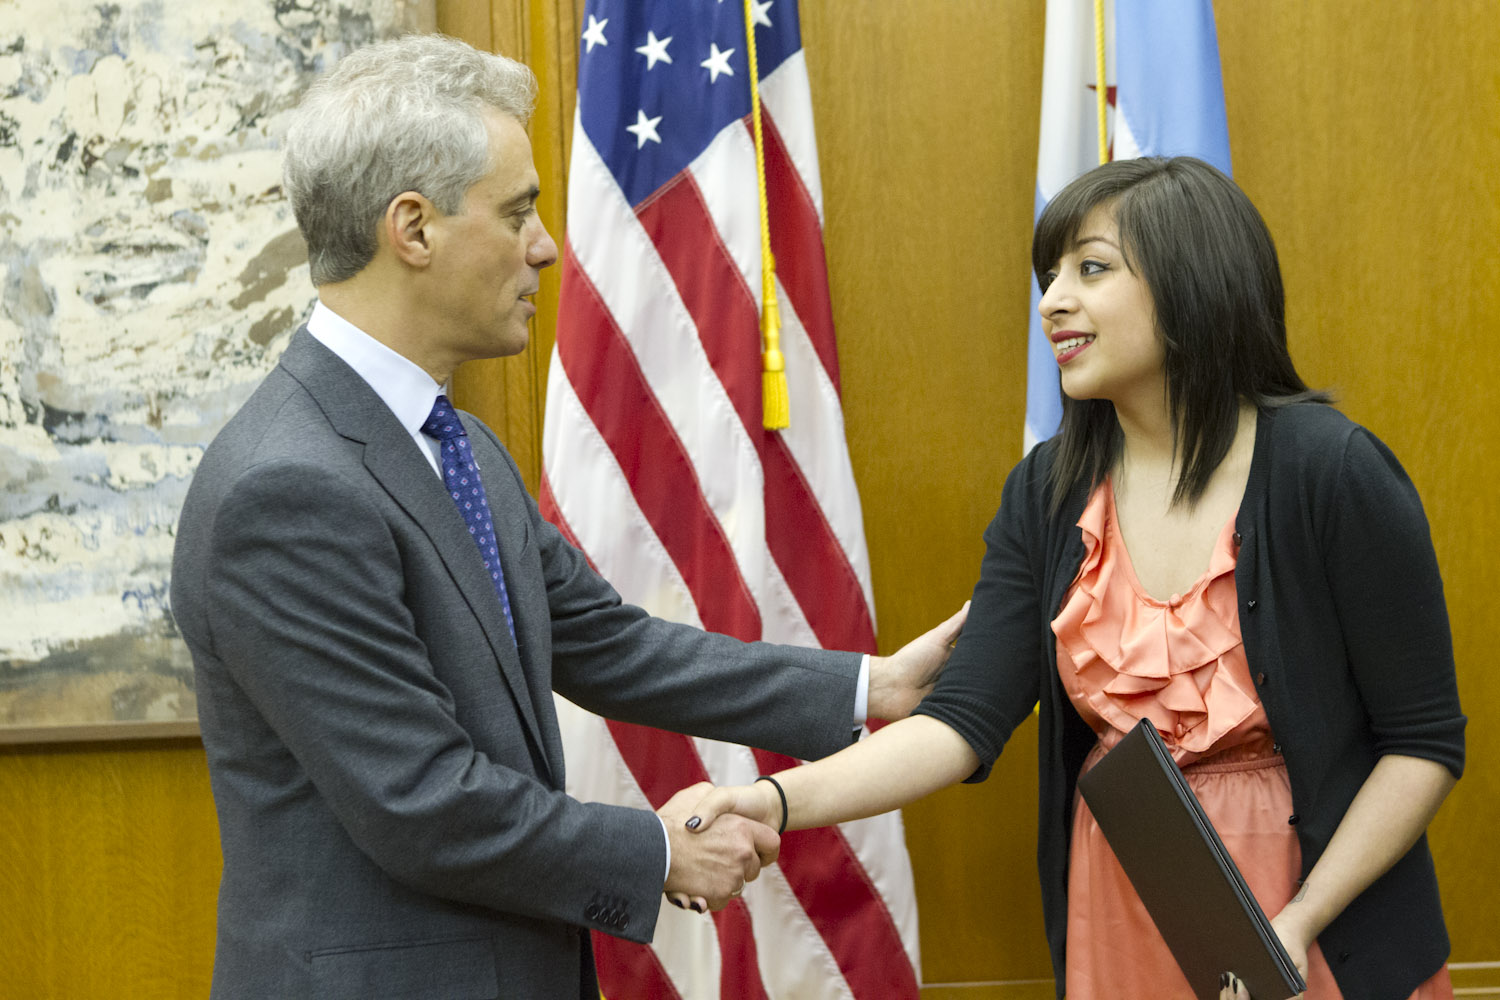 Mayor Emanuel Recognizes Chicago College Student Ariel Aguilera for Civic Leadership and Highlights the Importance of Volunteerism